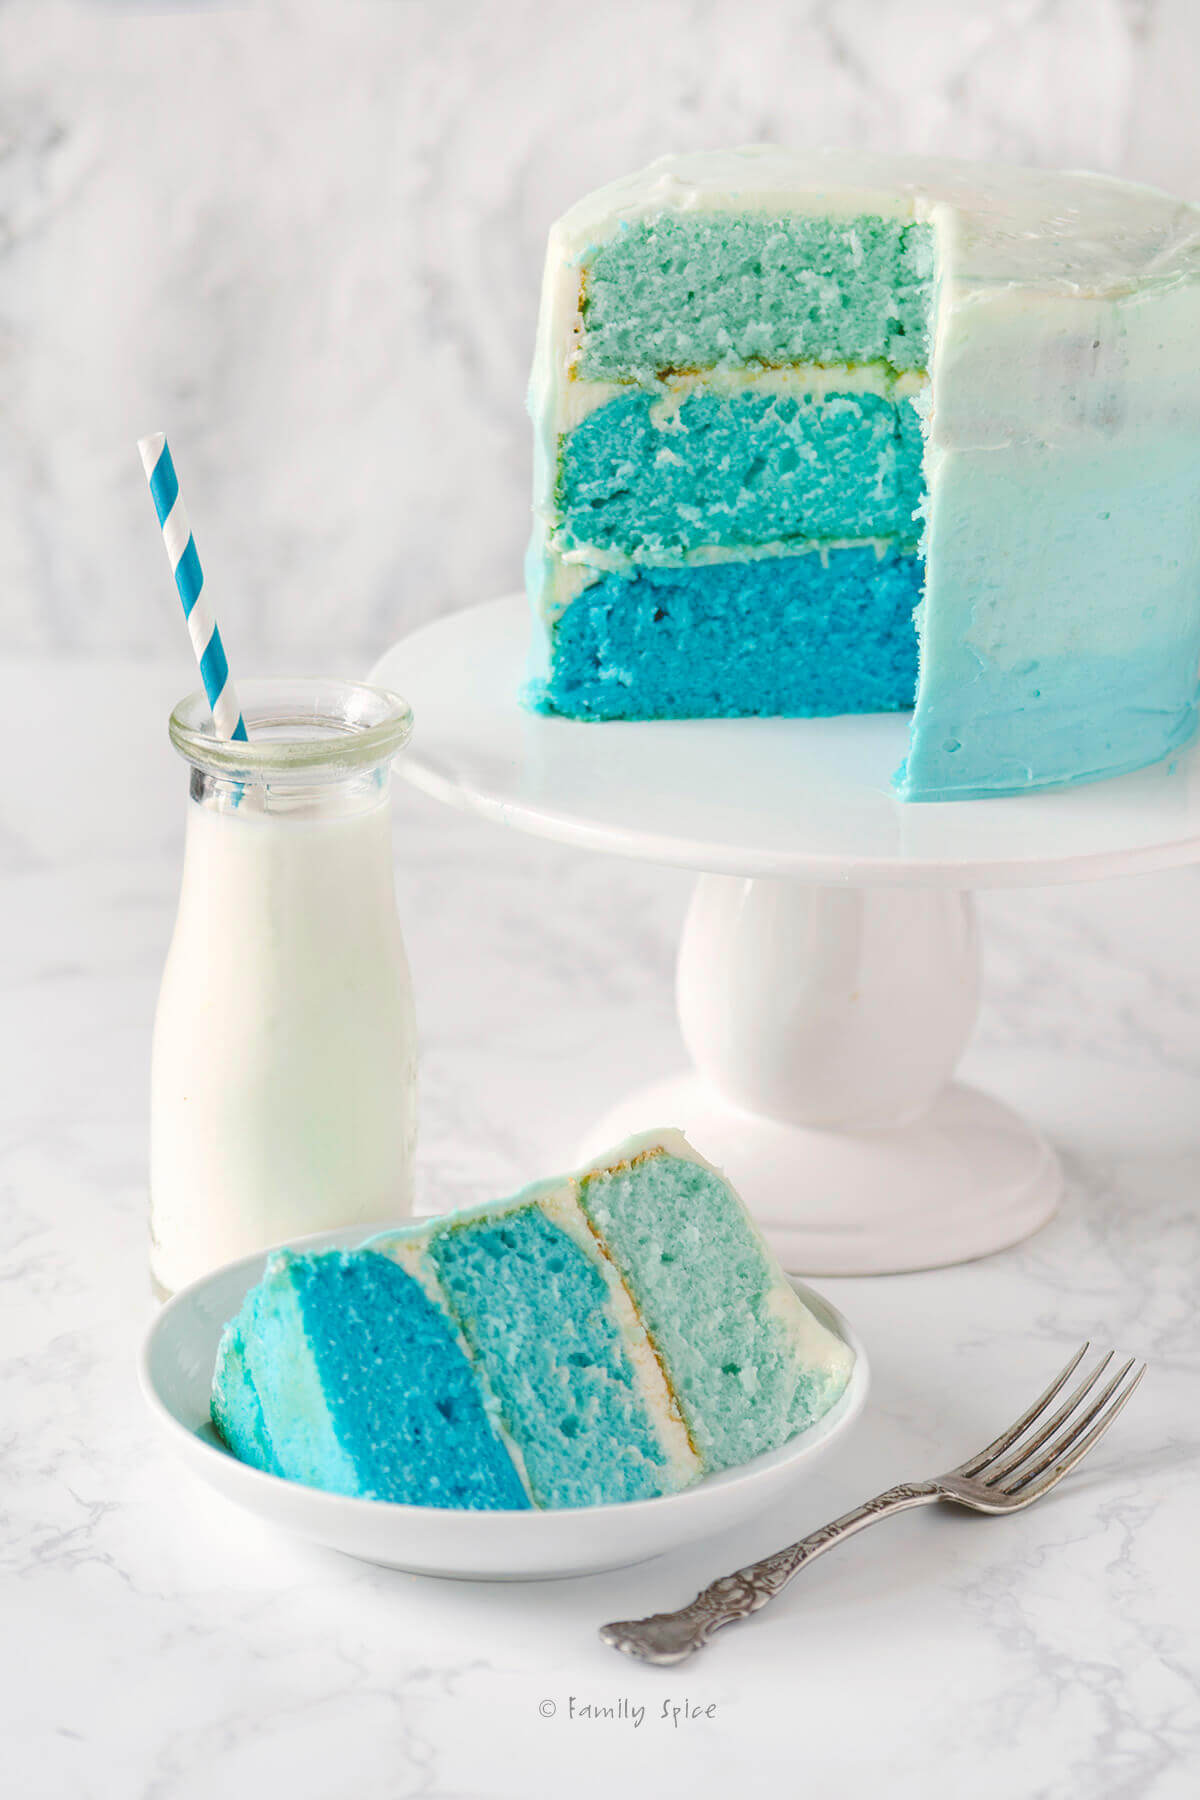 Green Ombre Swirl Cake - Homemade Cakes - Johnny's Kitchen